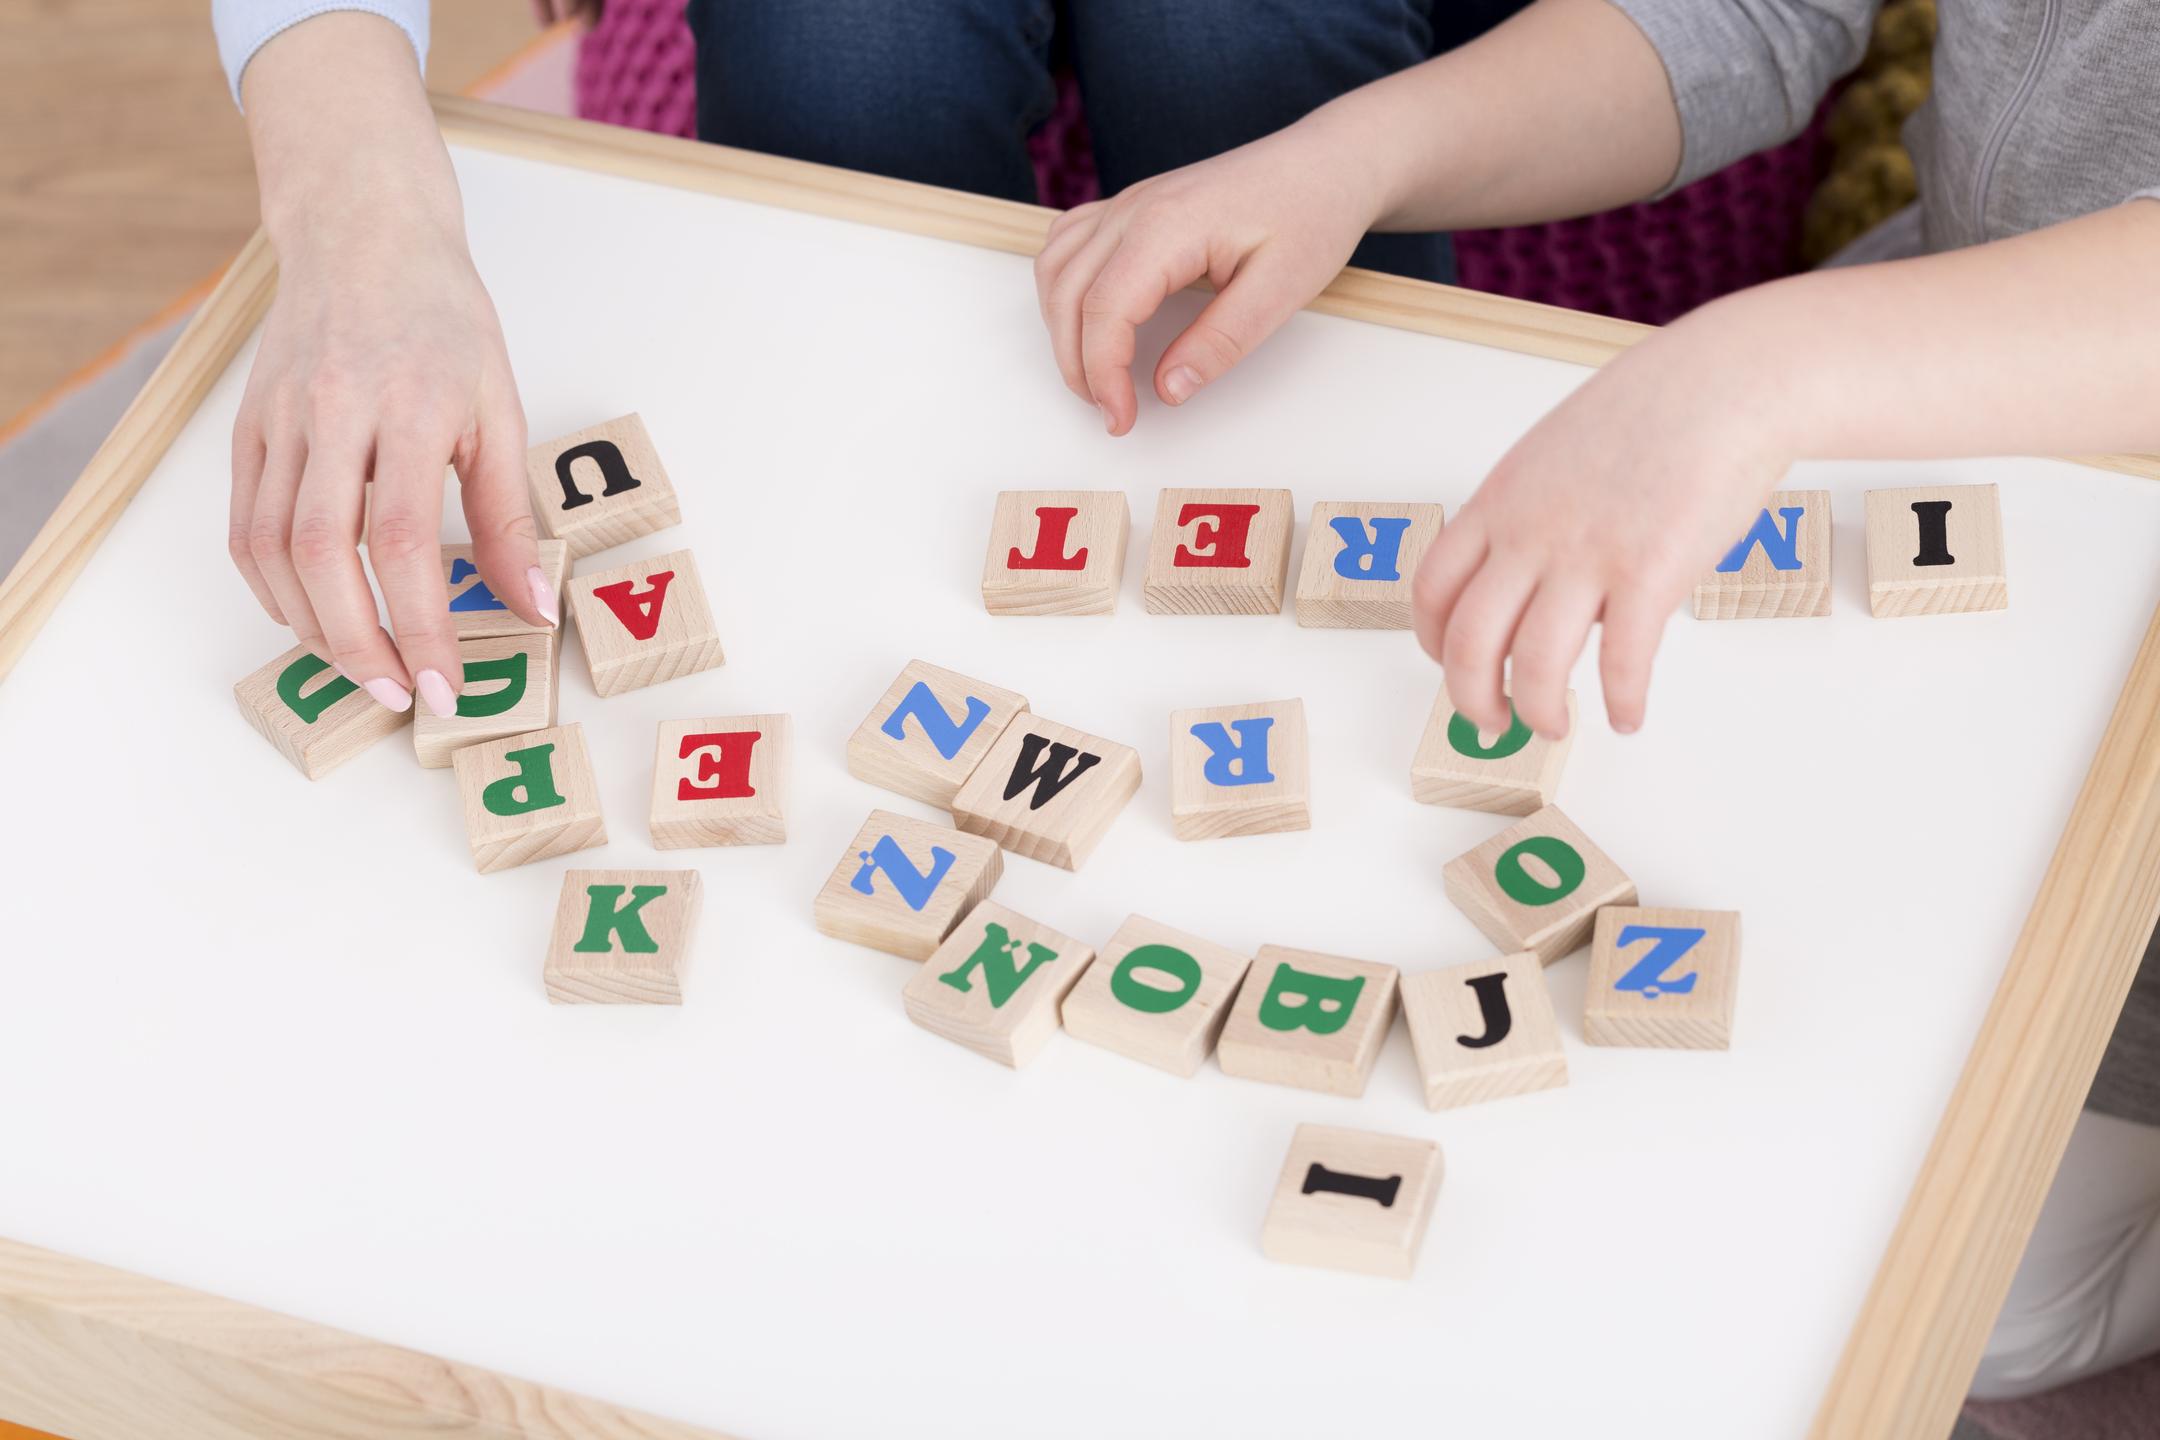 Colorful wooden blocks with letters on them, arranged to support learning and literacy development in a playful, educational setting.